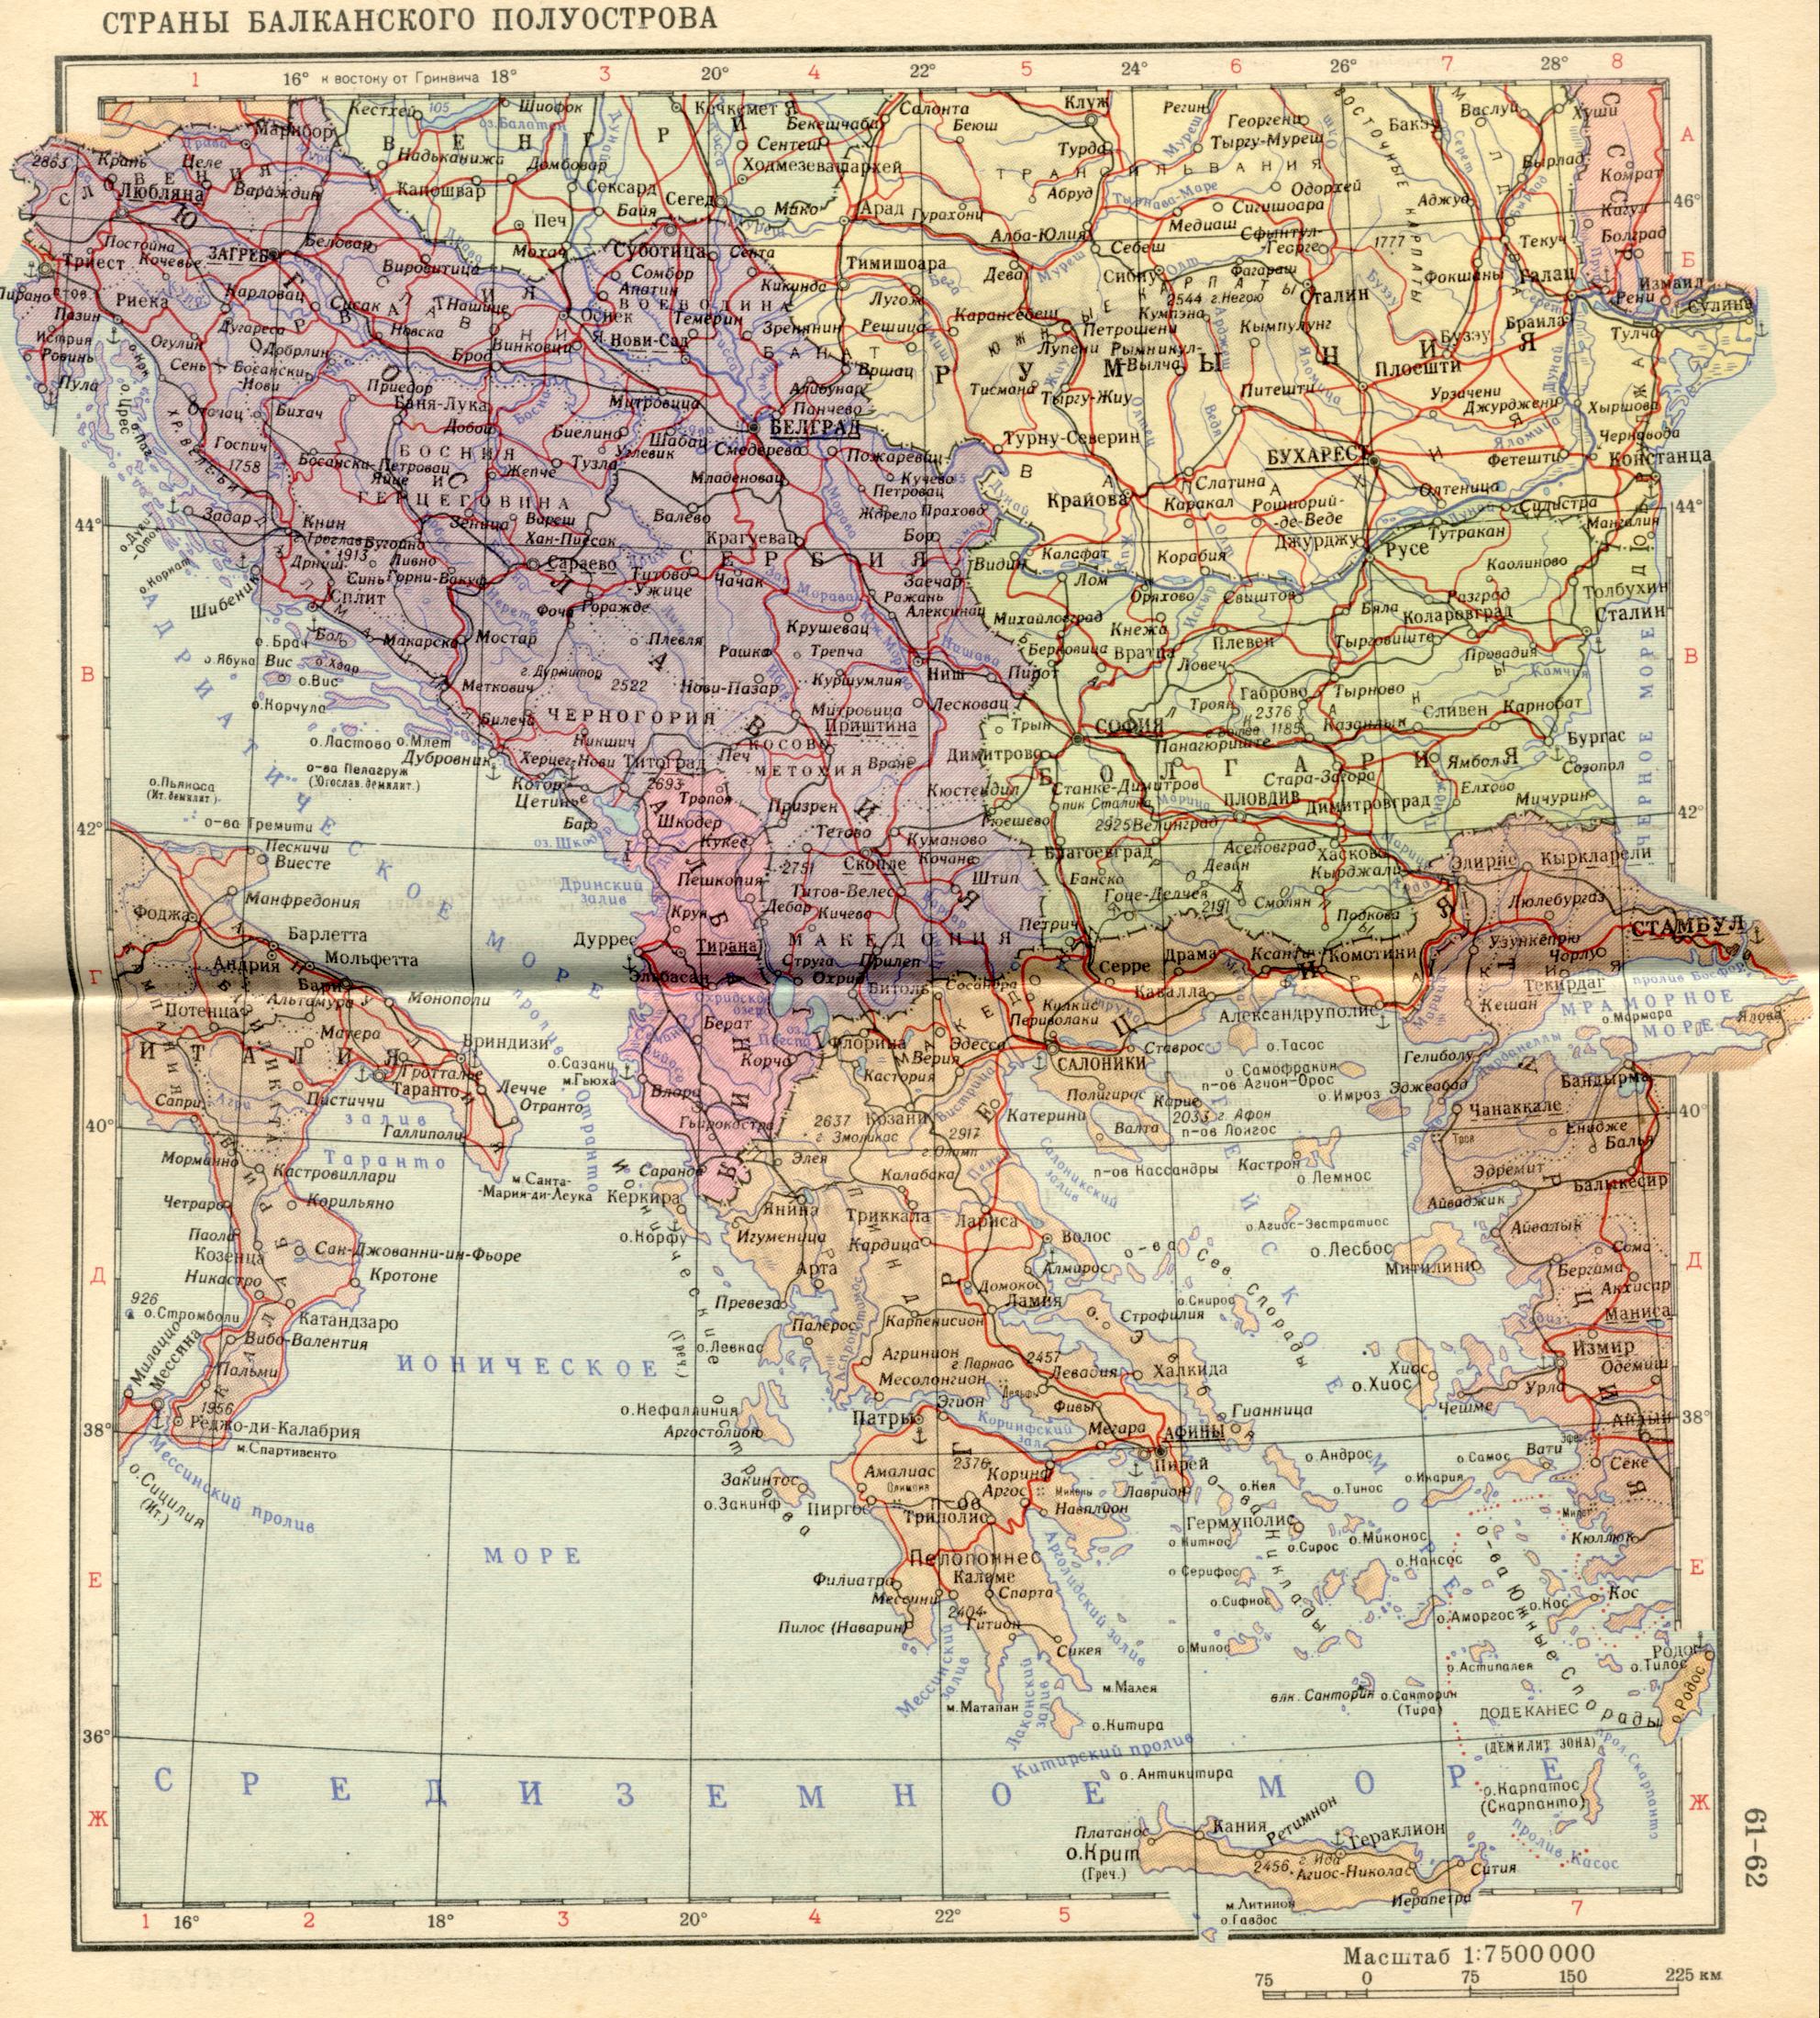 1956 year. The political map of Europe is the Balkan Peninsula. Download a detailed map